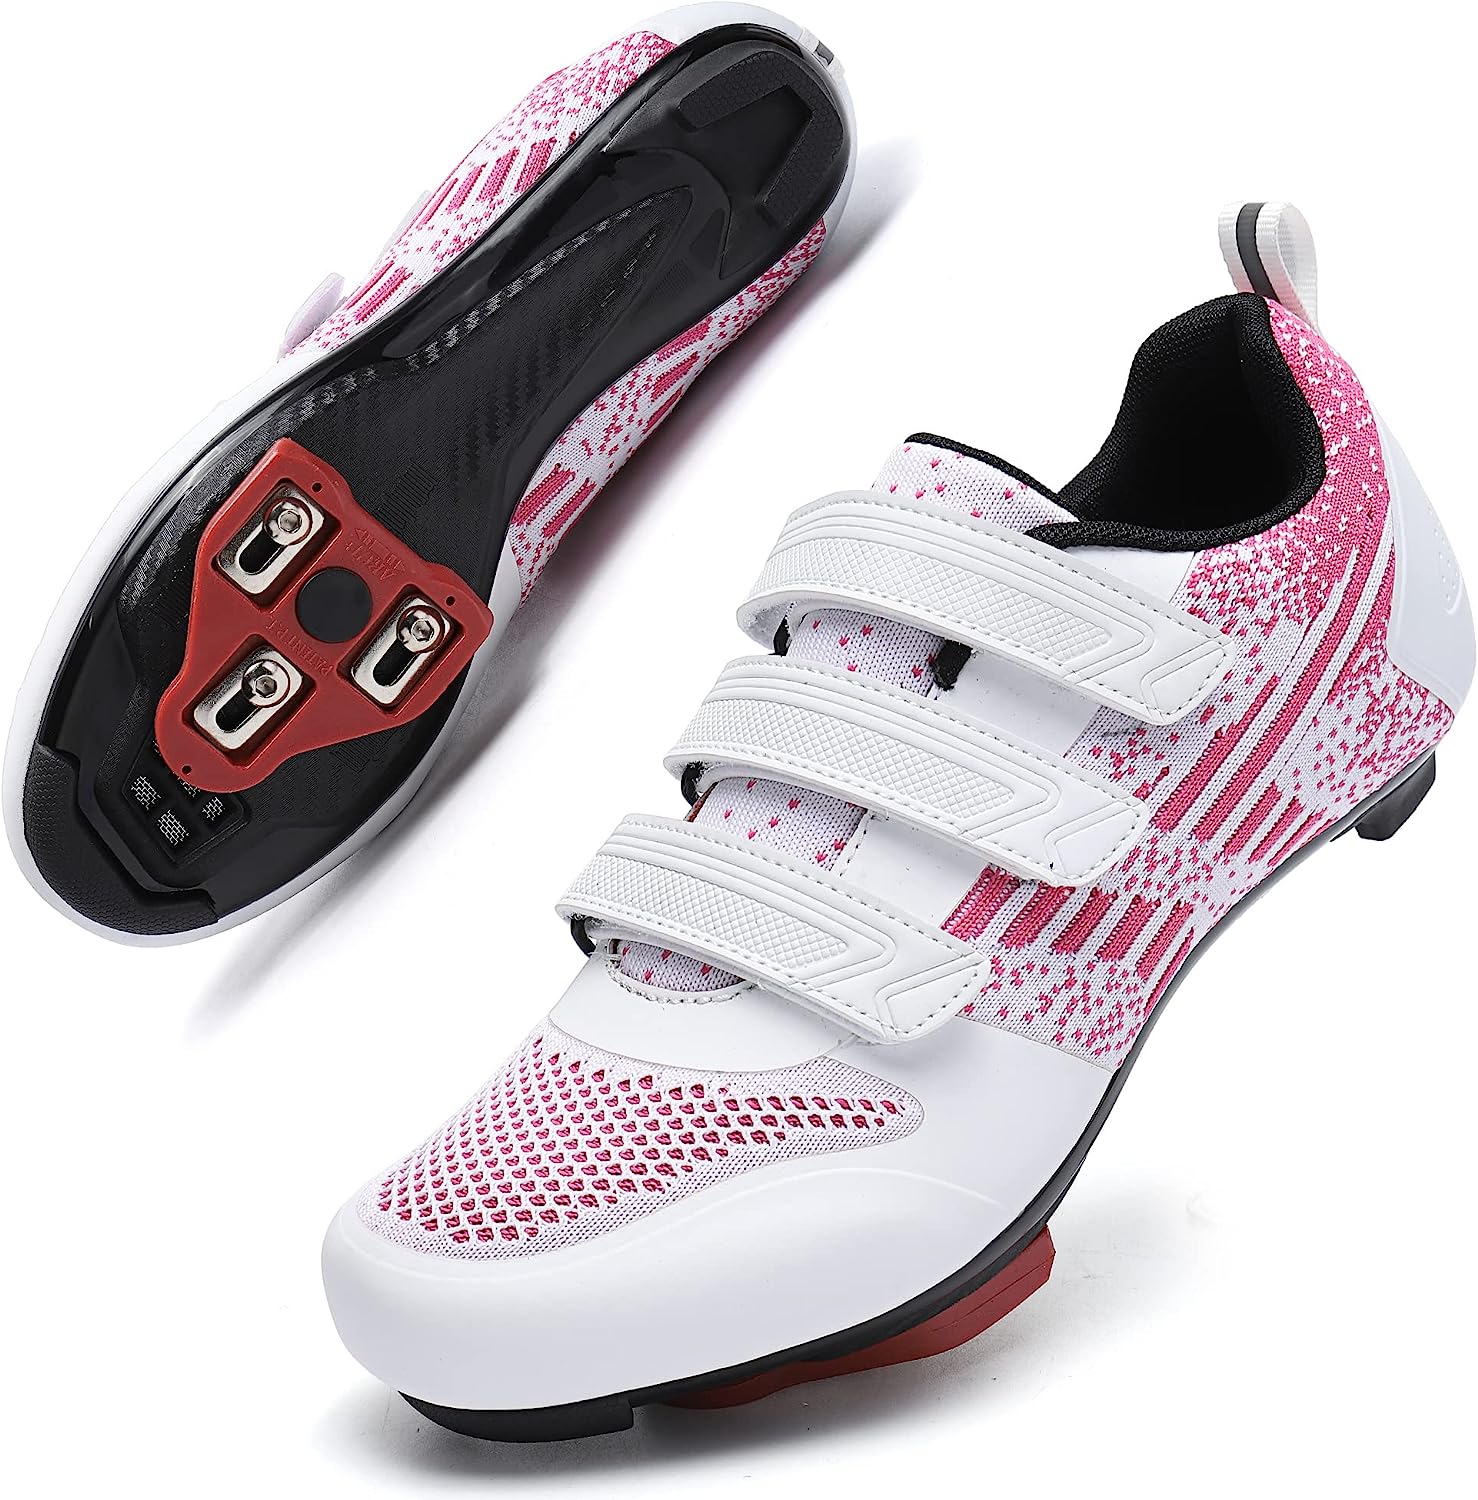 Unisex Road Bike Cycling Shoes Compatible with Peloton [...]